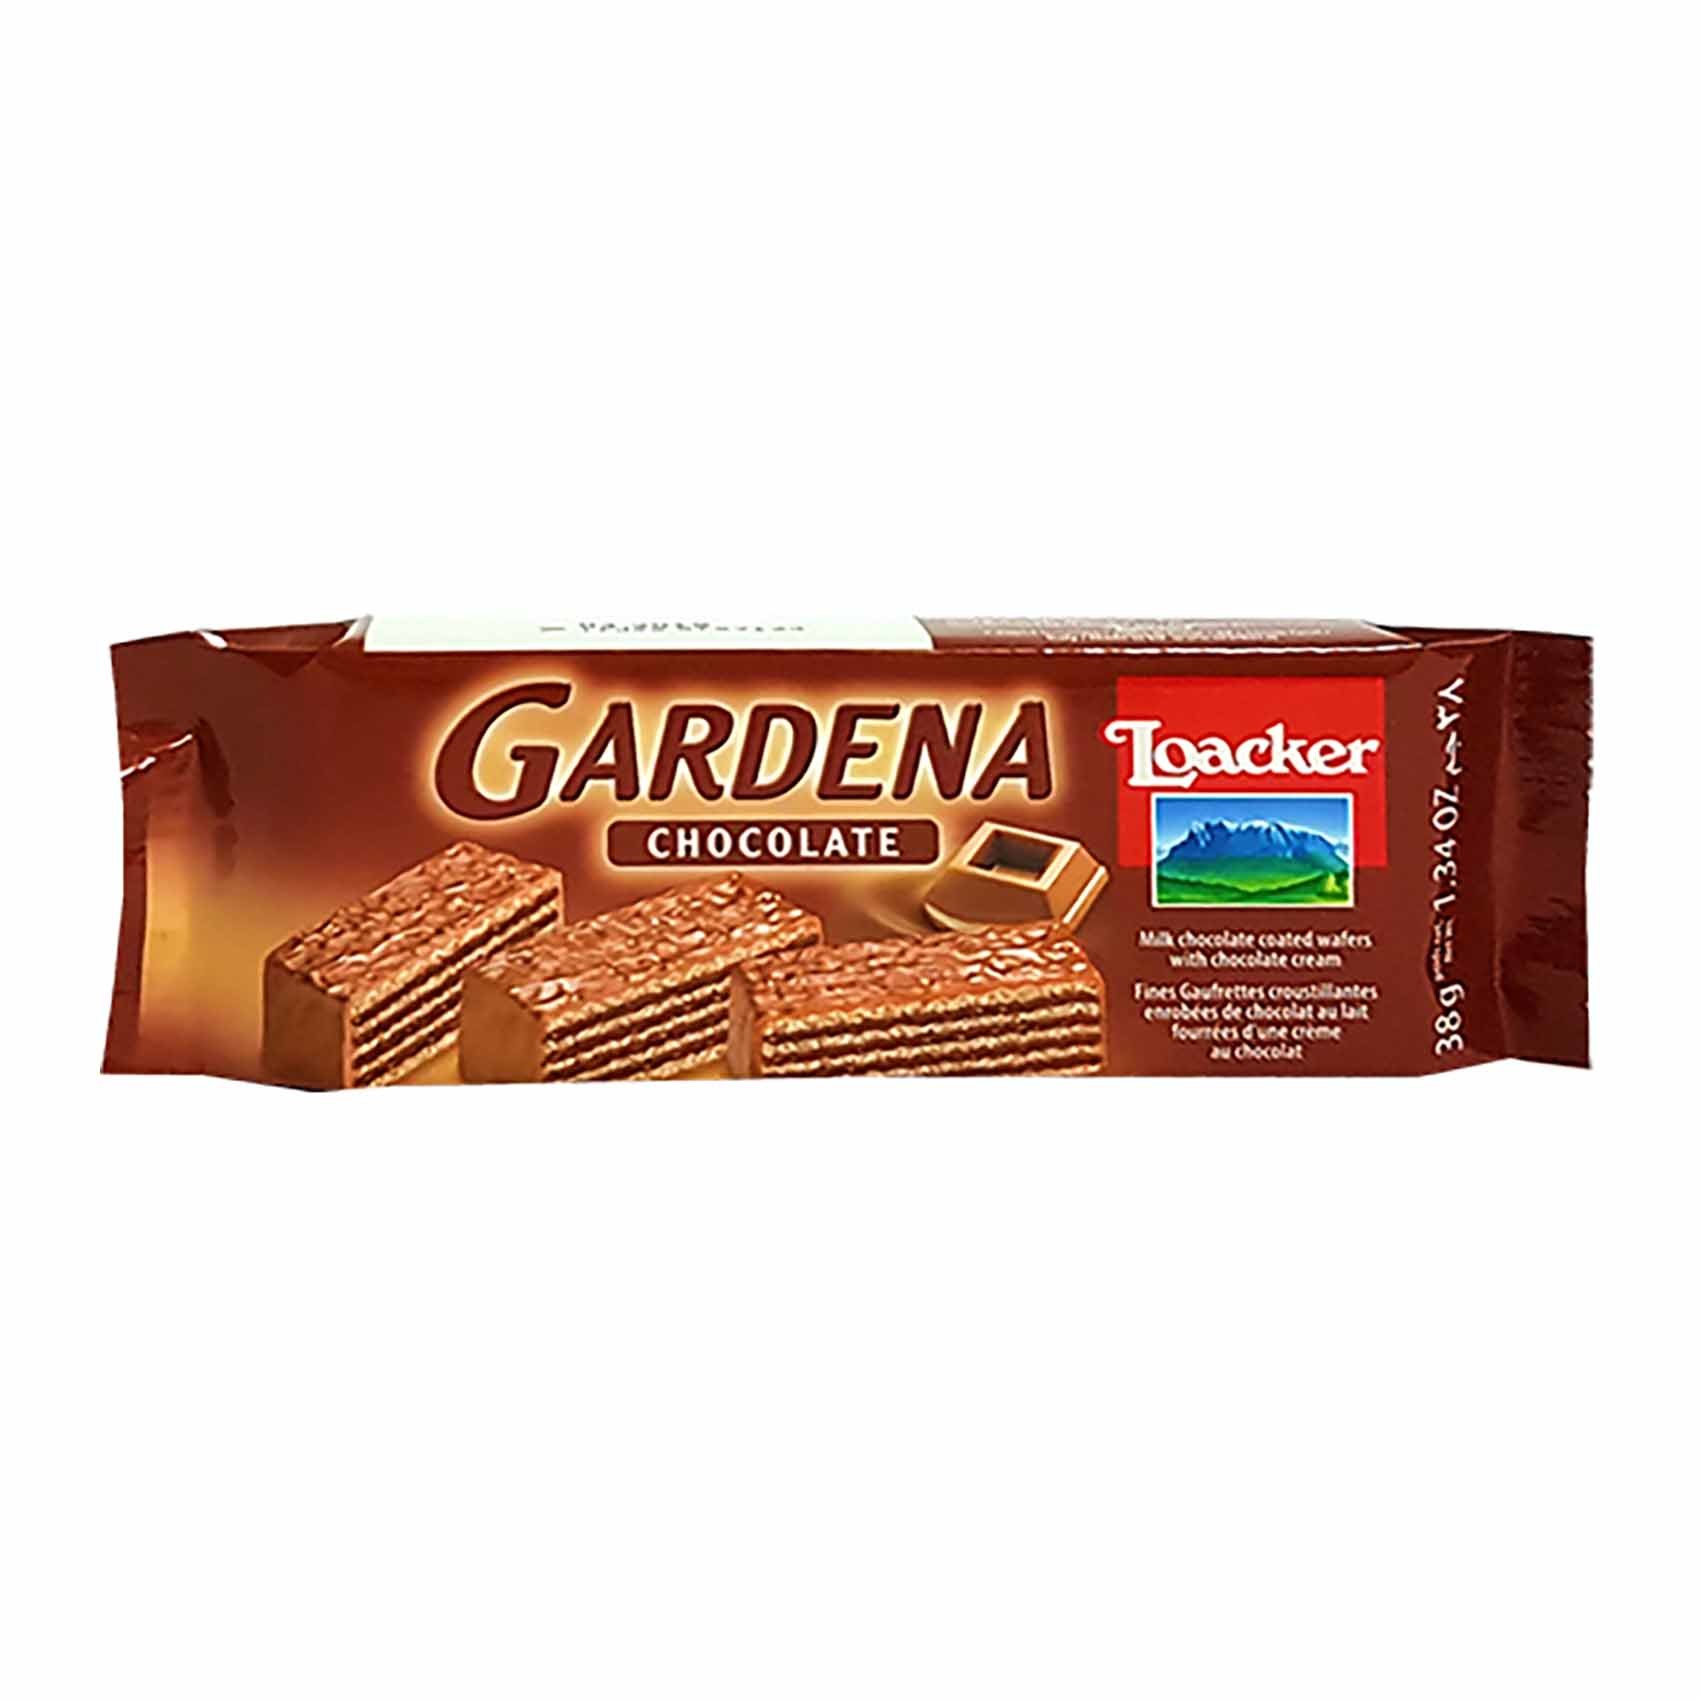 Buy Loacker Gardena Wafer With Chocolate 38 Gm Online Shop Food Cupboard On Carrefour Egypt